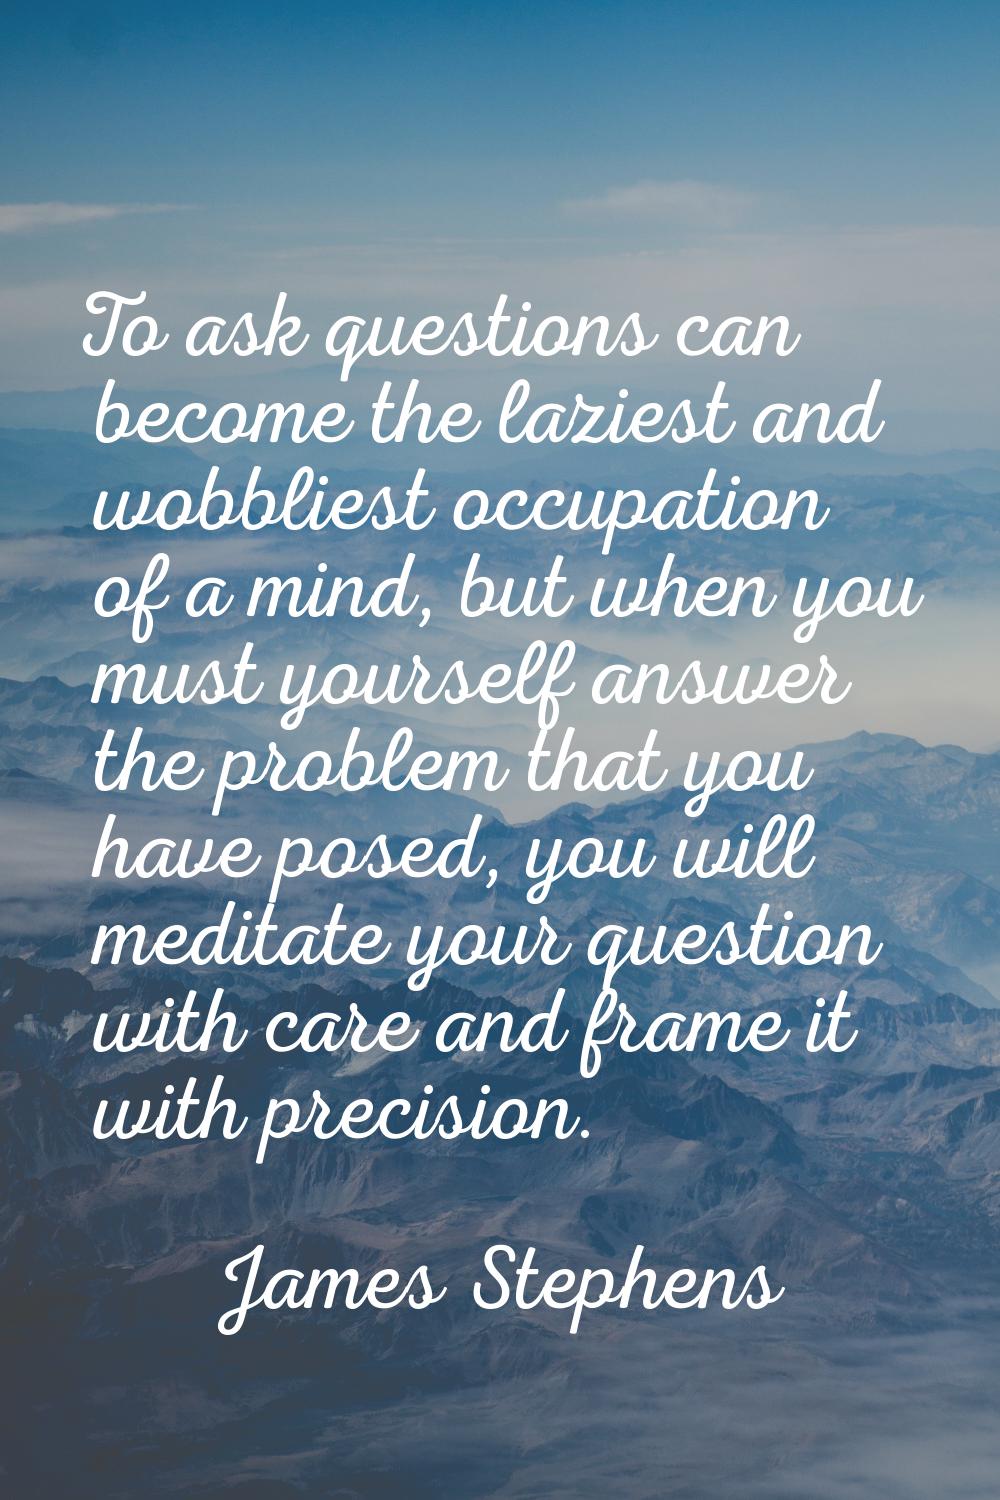 To ask questions can become the laziest and wobbliest occupation of a mind, but when you must yours